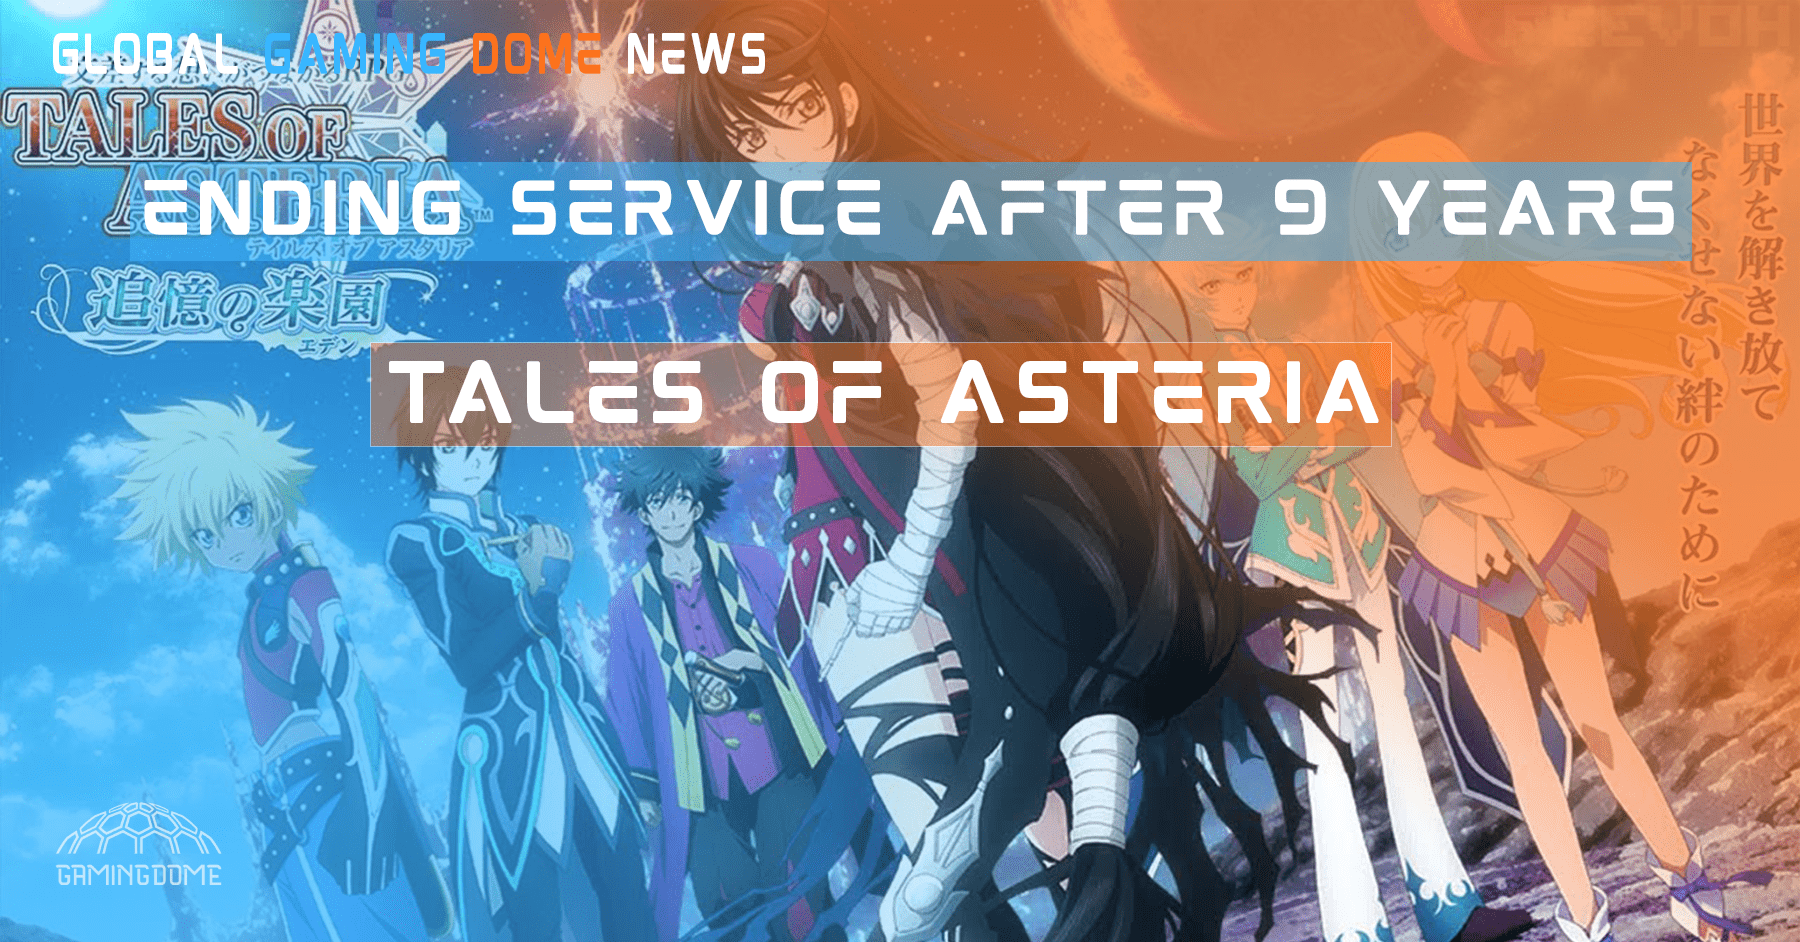 Bandai Namco Tales of Asteria Ending Service After 9 Years